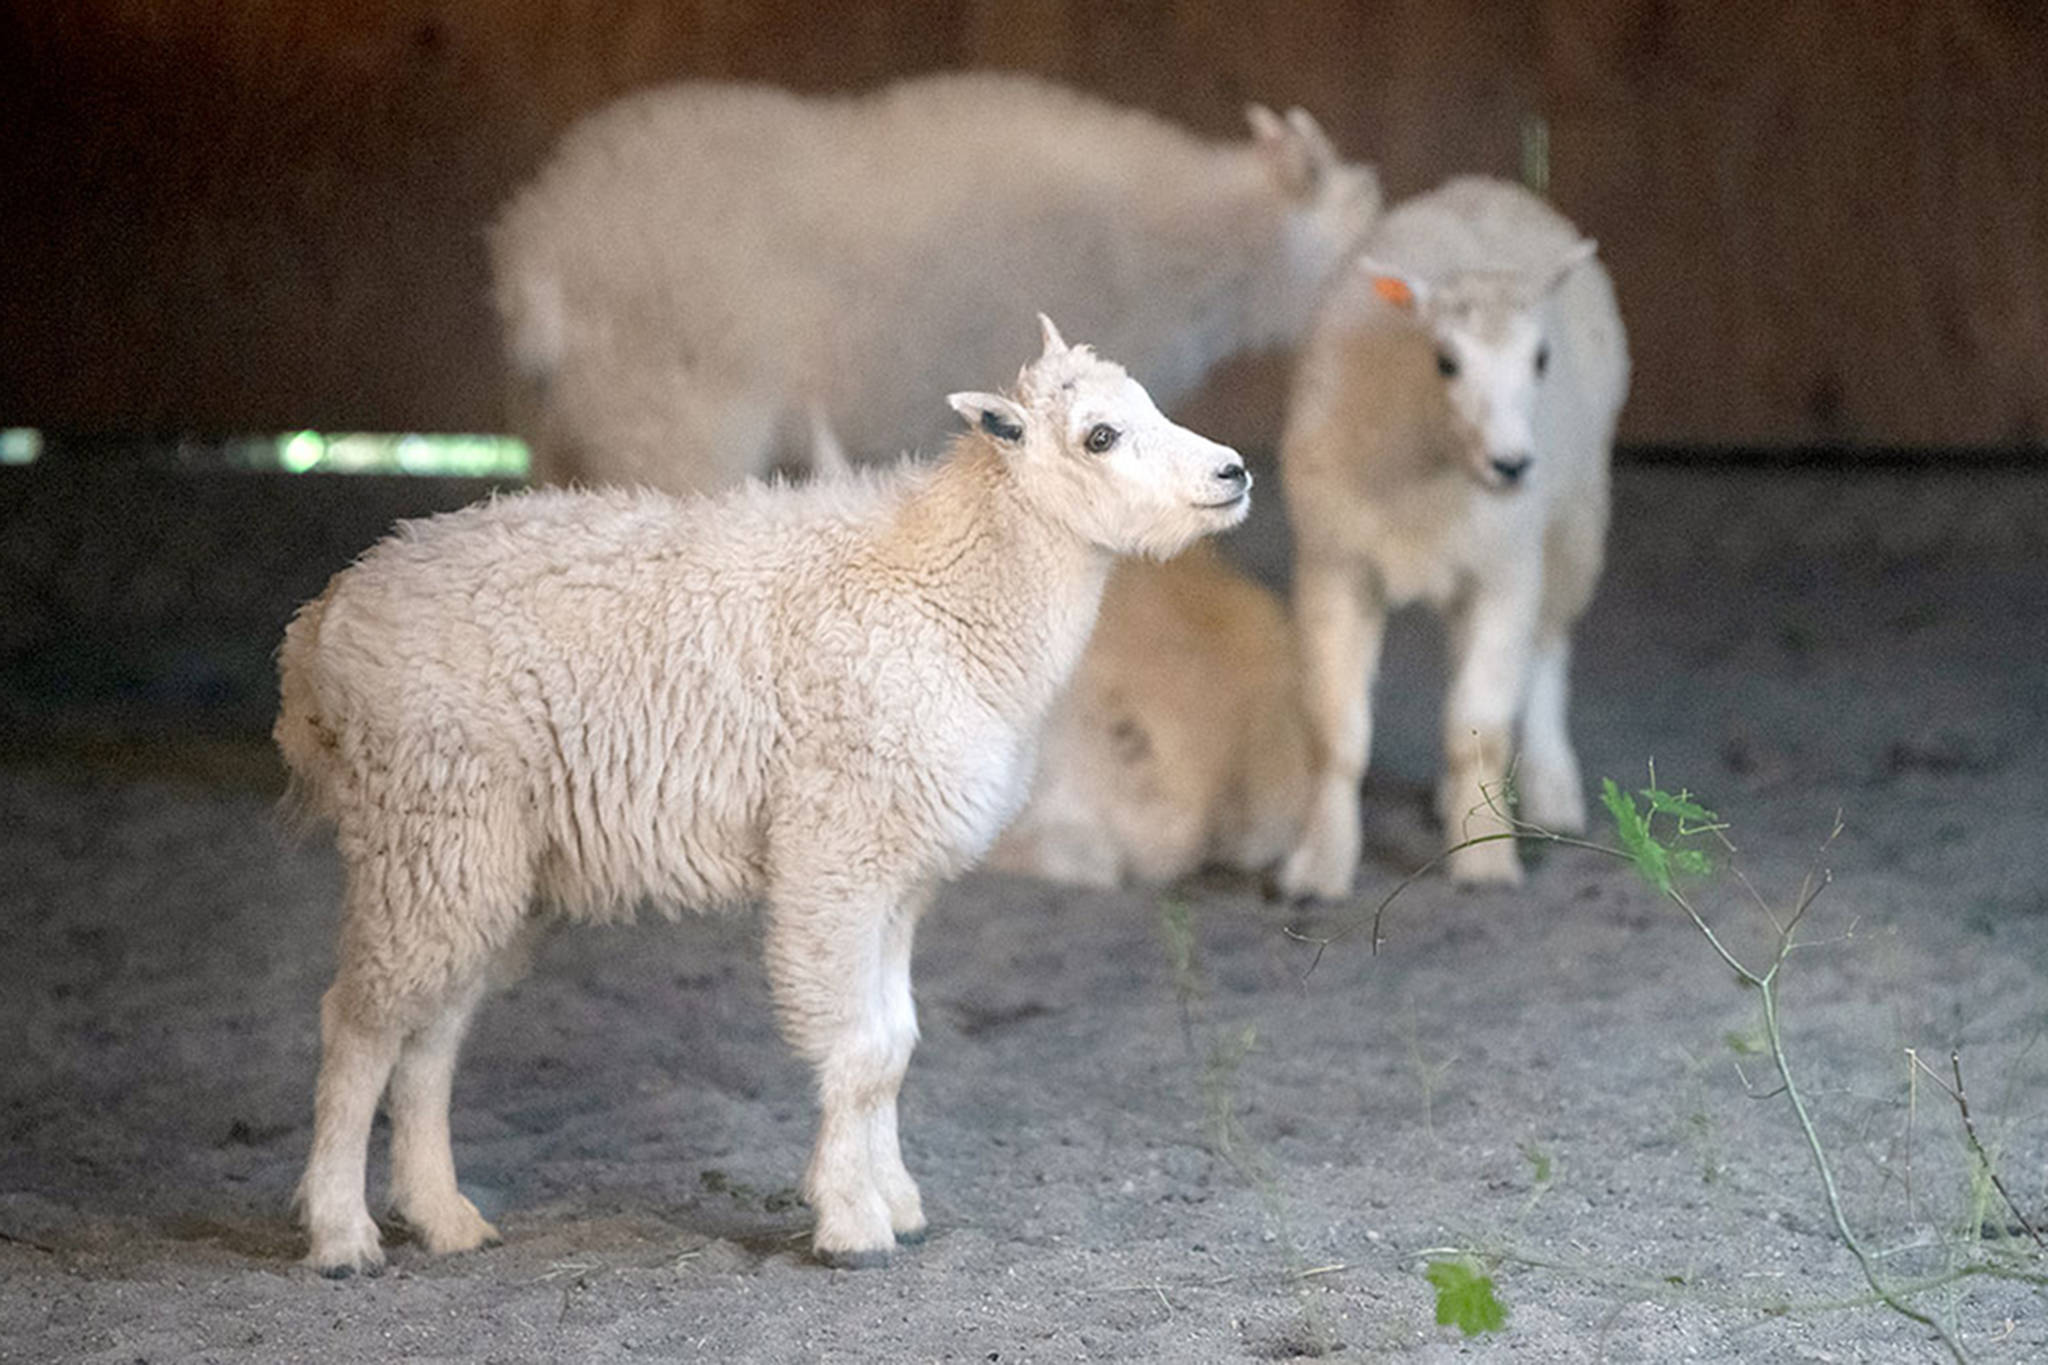 Young mountain goats housed in wildlife park